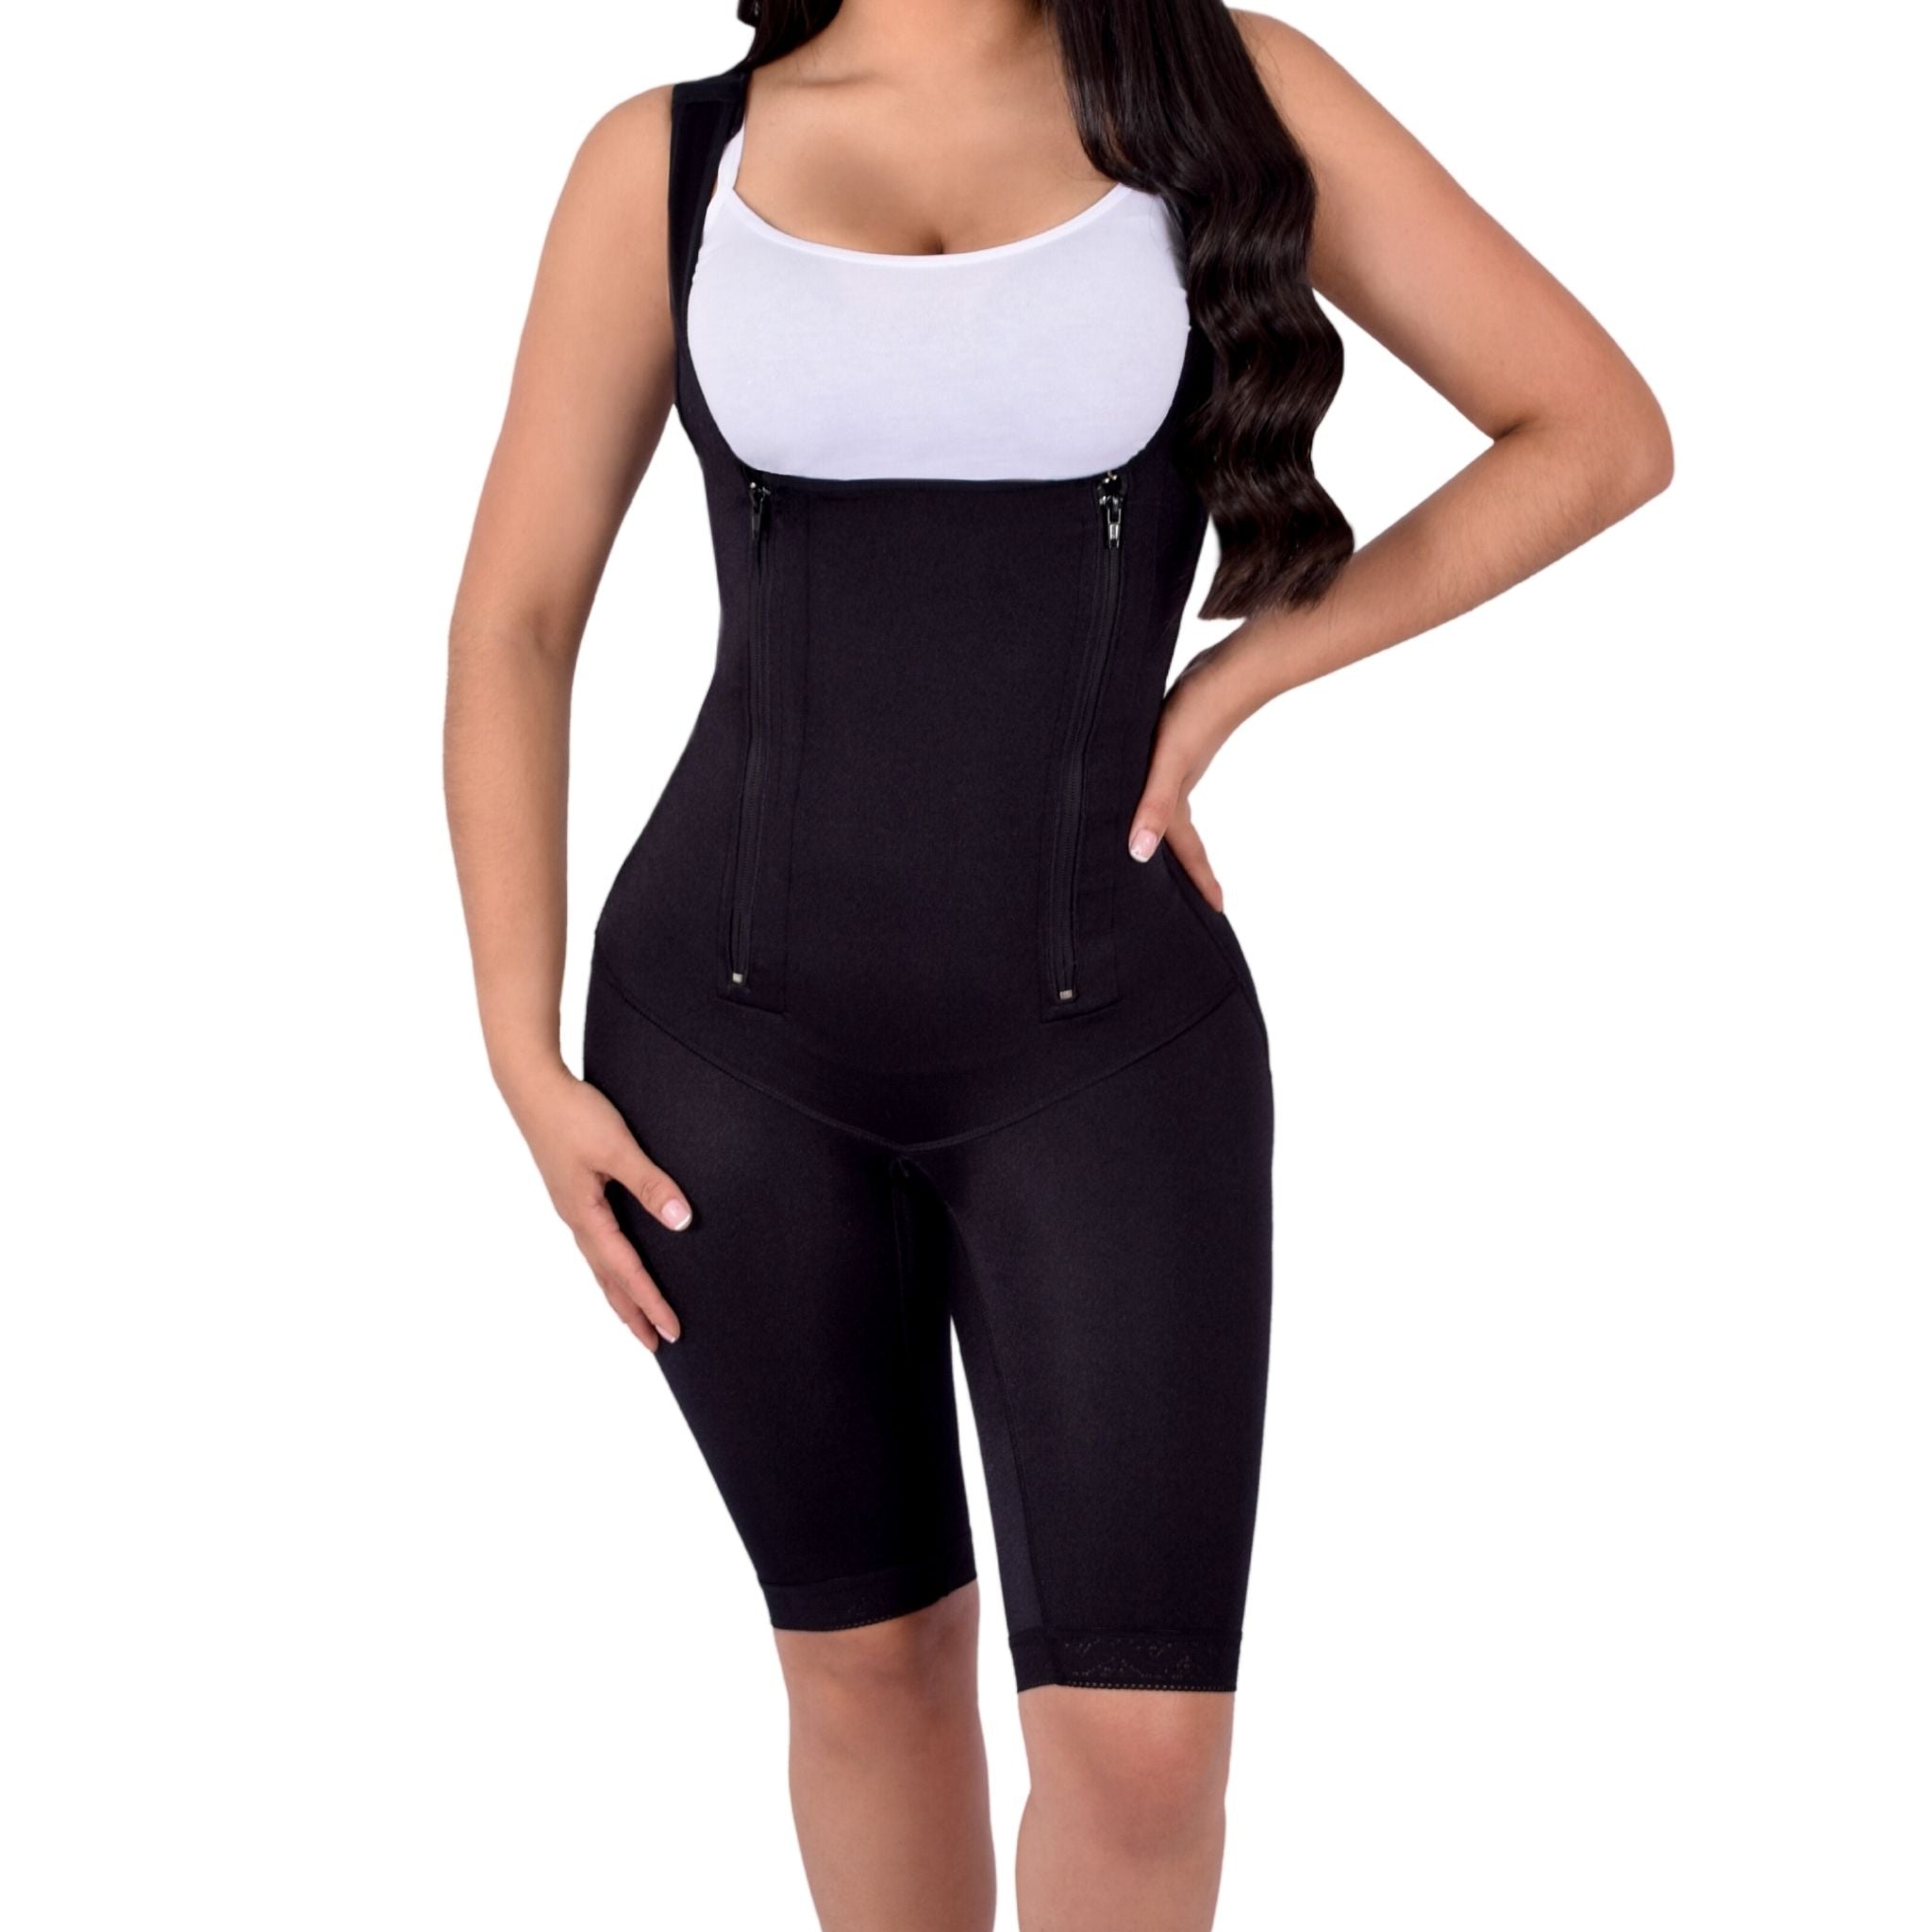 PG Curves Post Surgery Seamless Low Compression Garment for Women